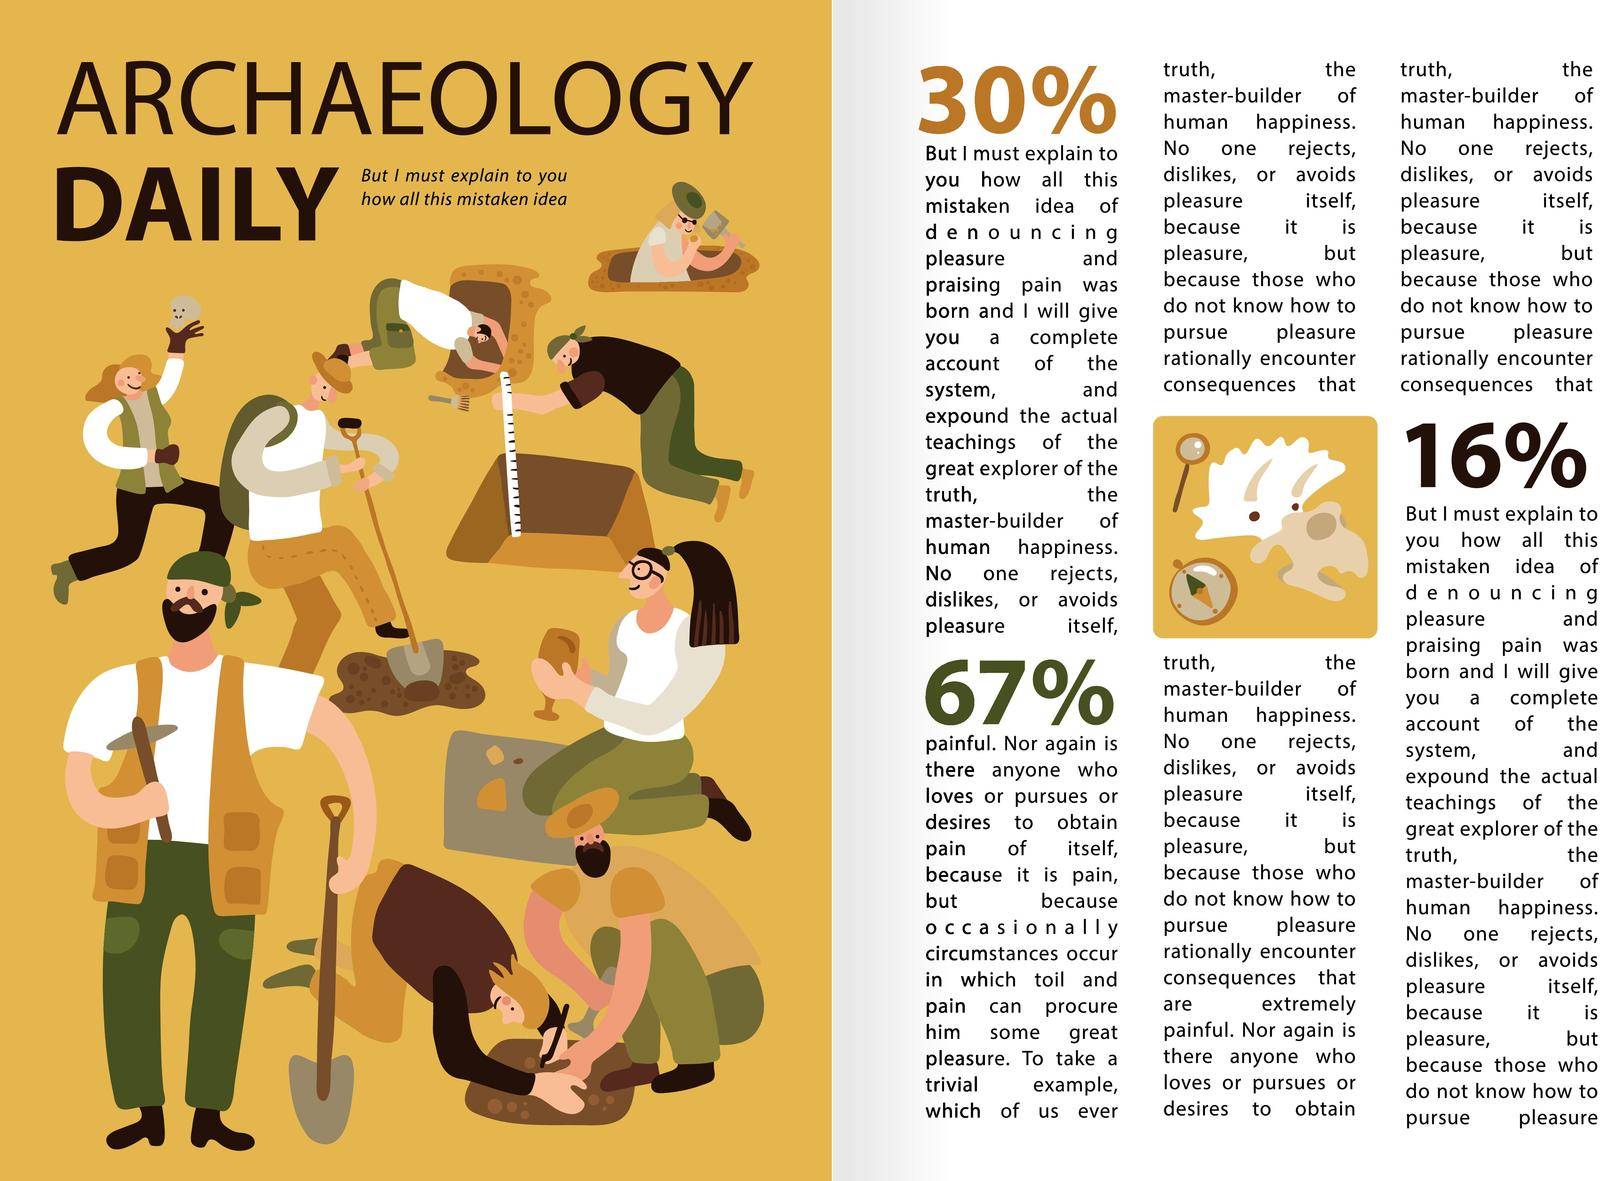 Archaeologists daily work infographic presentation with tasks description  discoveries statistics text funny characters excavation site vector illustration 